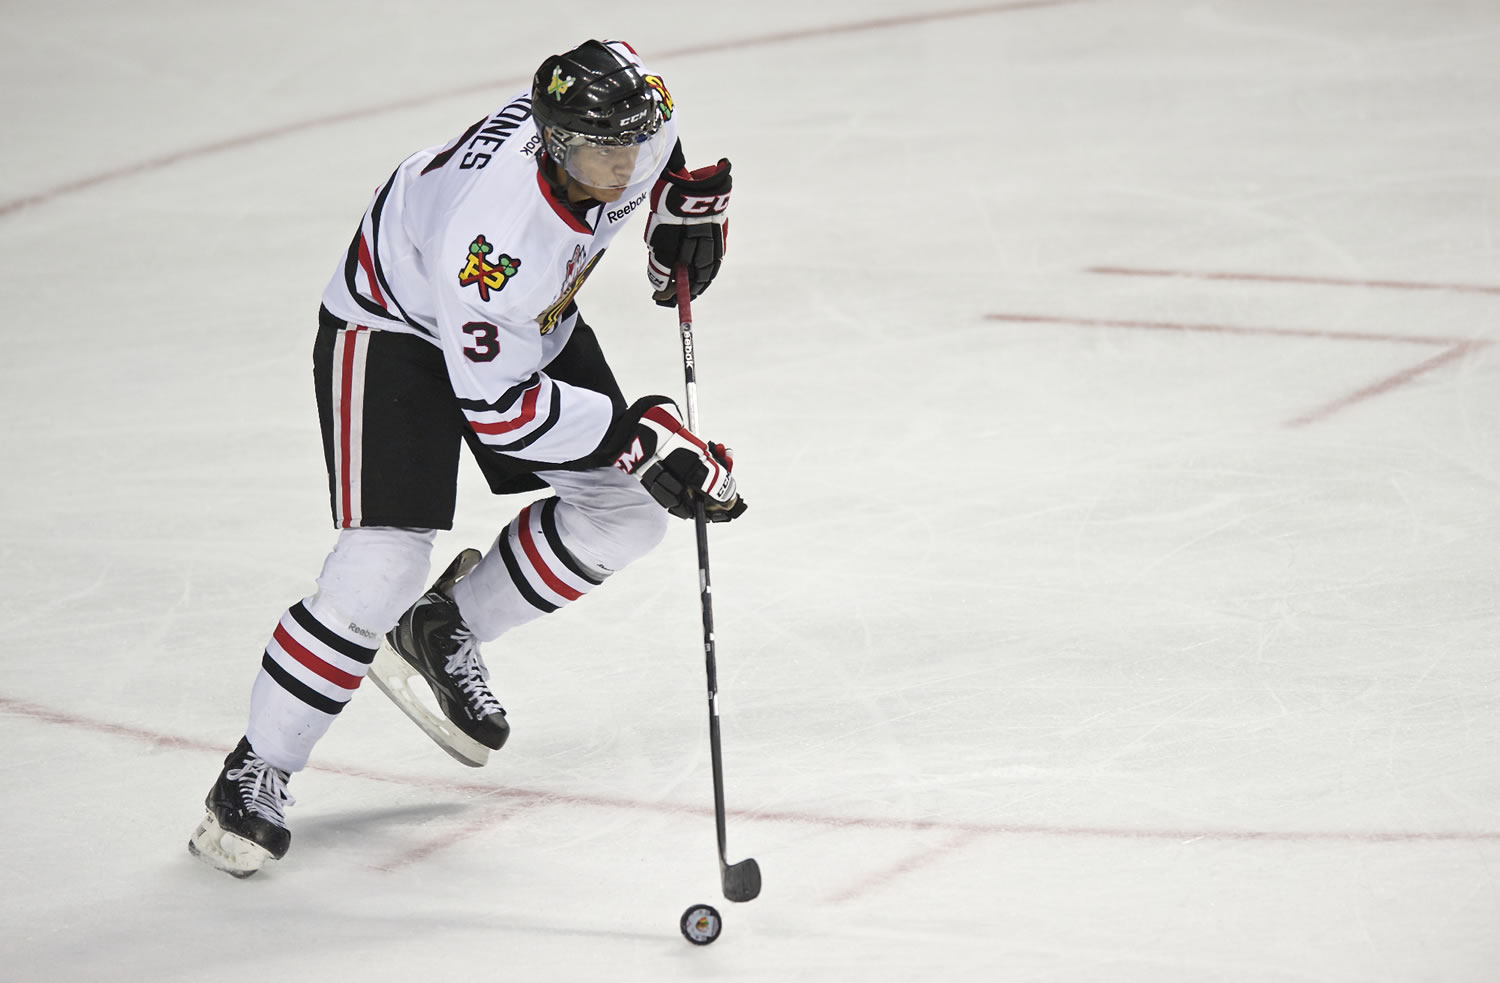 As the Winterhawks move on, Seth Jones focuses on winning the Memorial Cup but still can't help but wonder where he might land on June 30, the day of the NHL draft.